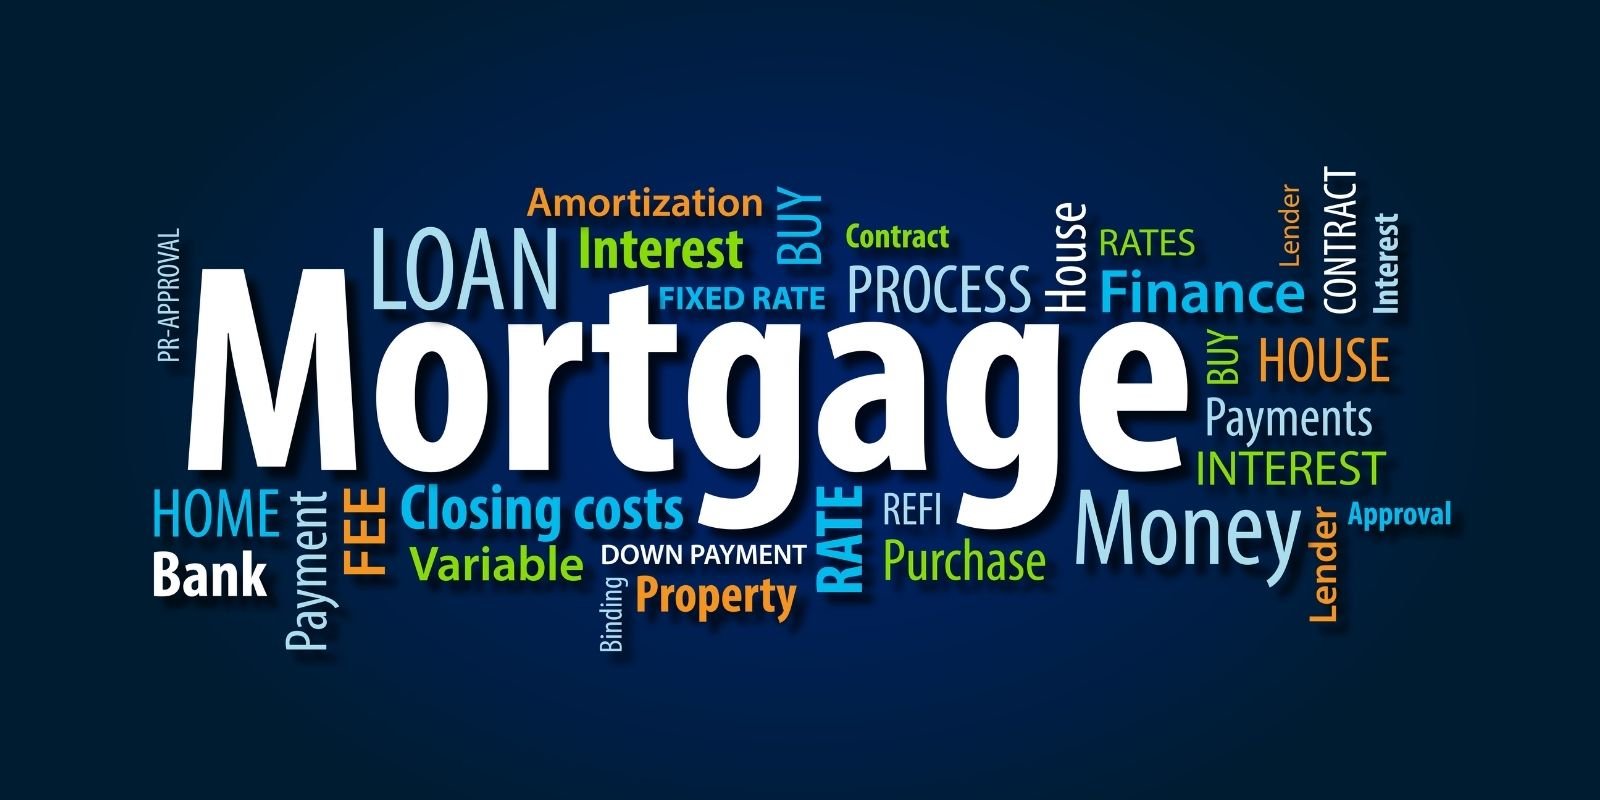 3. Know Your Mortgage Options